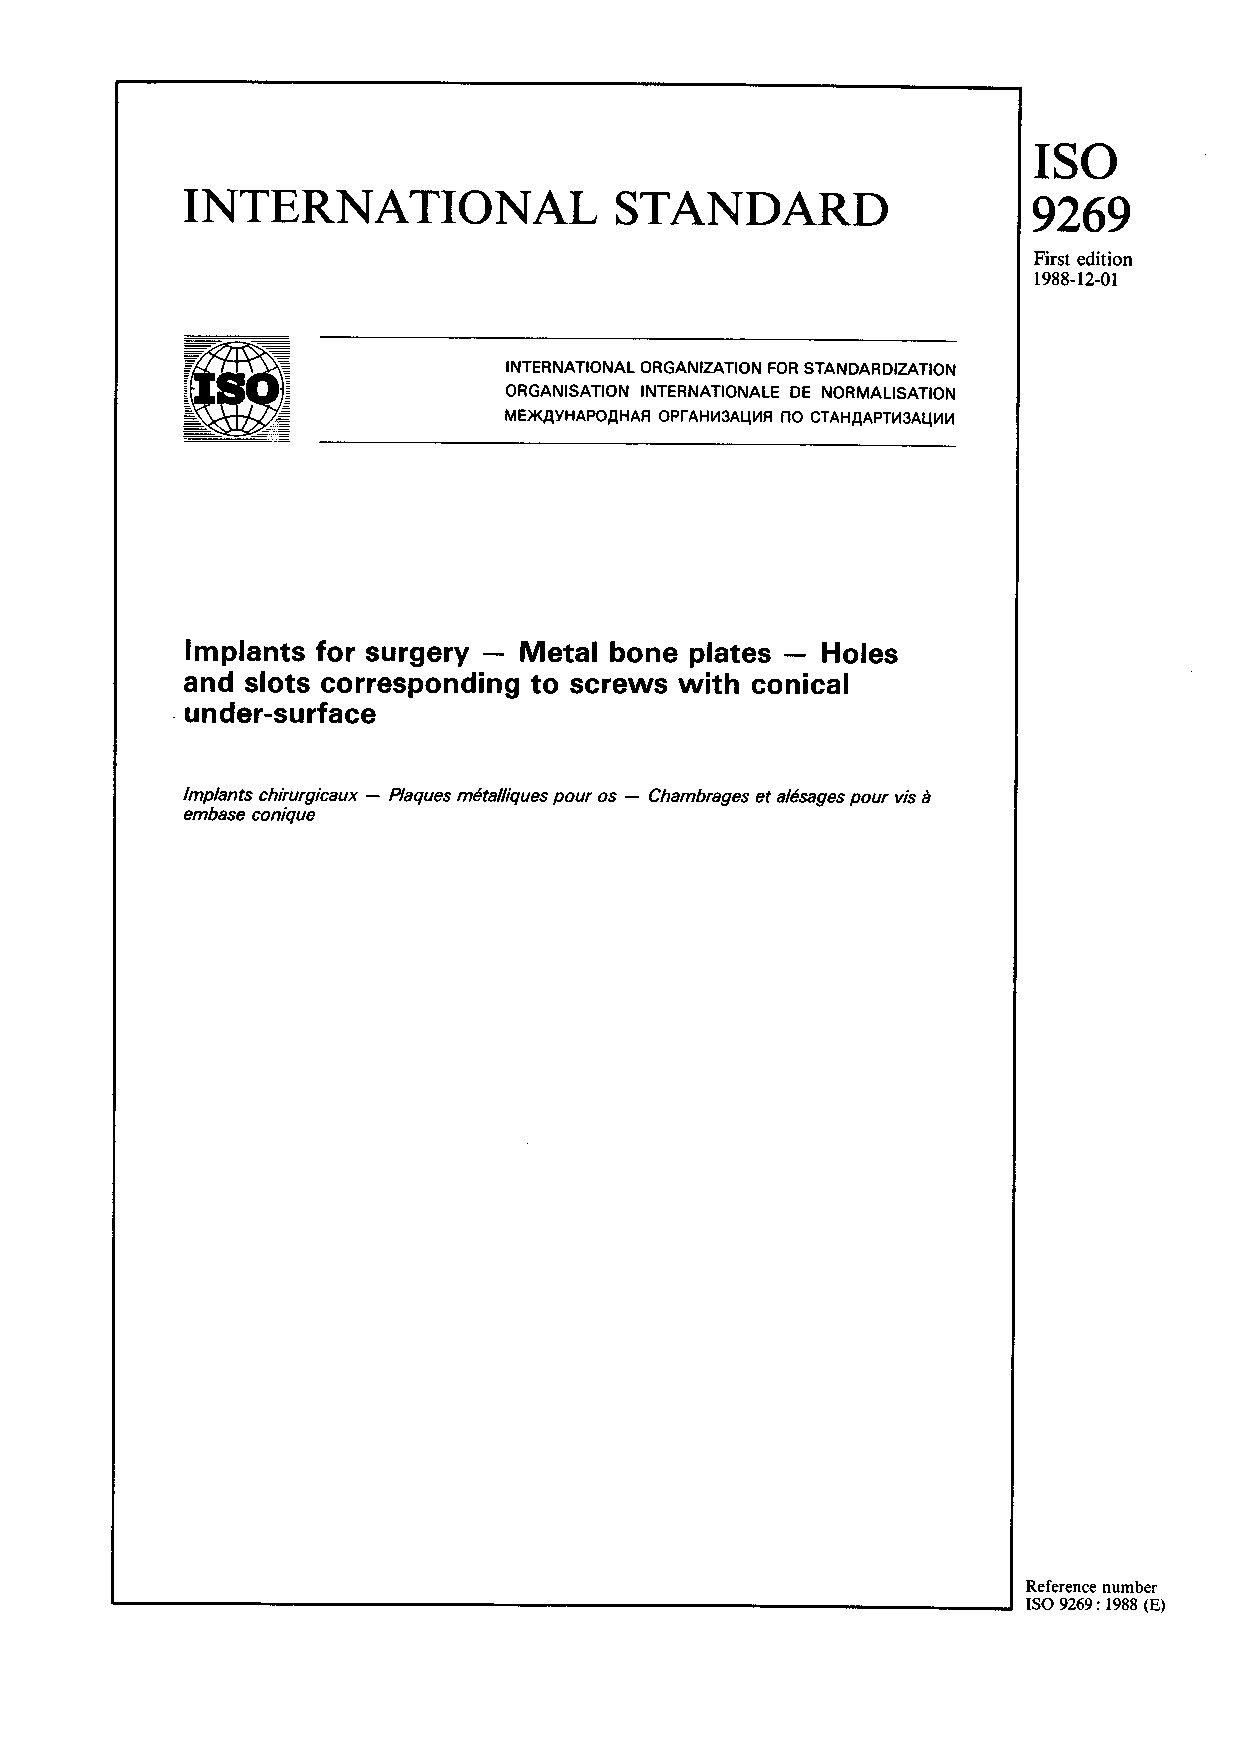 ISO 9269:1988